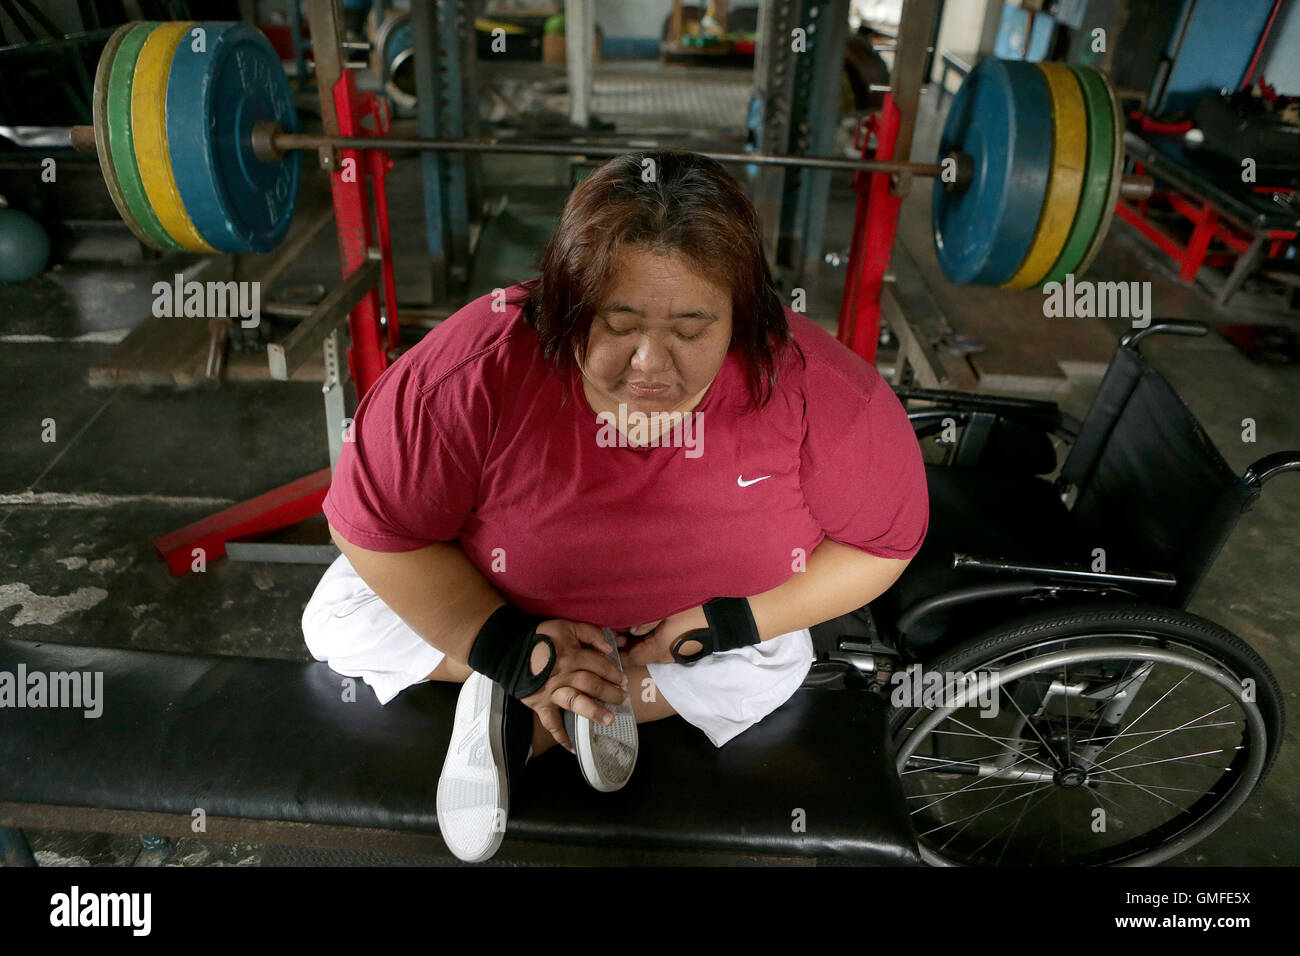 Quezon City, Philippines. 27th Aug, 2016. Philippine powerlifter Adeline Dumapong-Ancheta rests during a training session in preparation for the Rio Paralympic Games in Quezon City, the Philippines, Aug. 27, 2016. Adeline Dumapong-Ancheta, a polio victim since she was three years old, has won many medals in powerlifting events in various international competitions and is qualified to compete in the Rio Paralympic Games in September. © Rouelle Umali/Xinhua/Alamy Live News Stock Photo